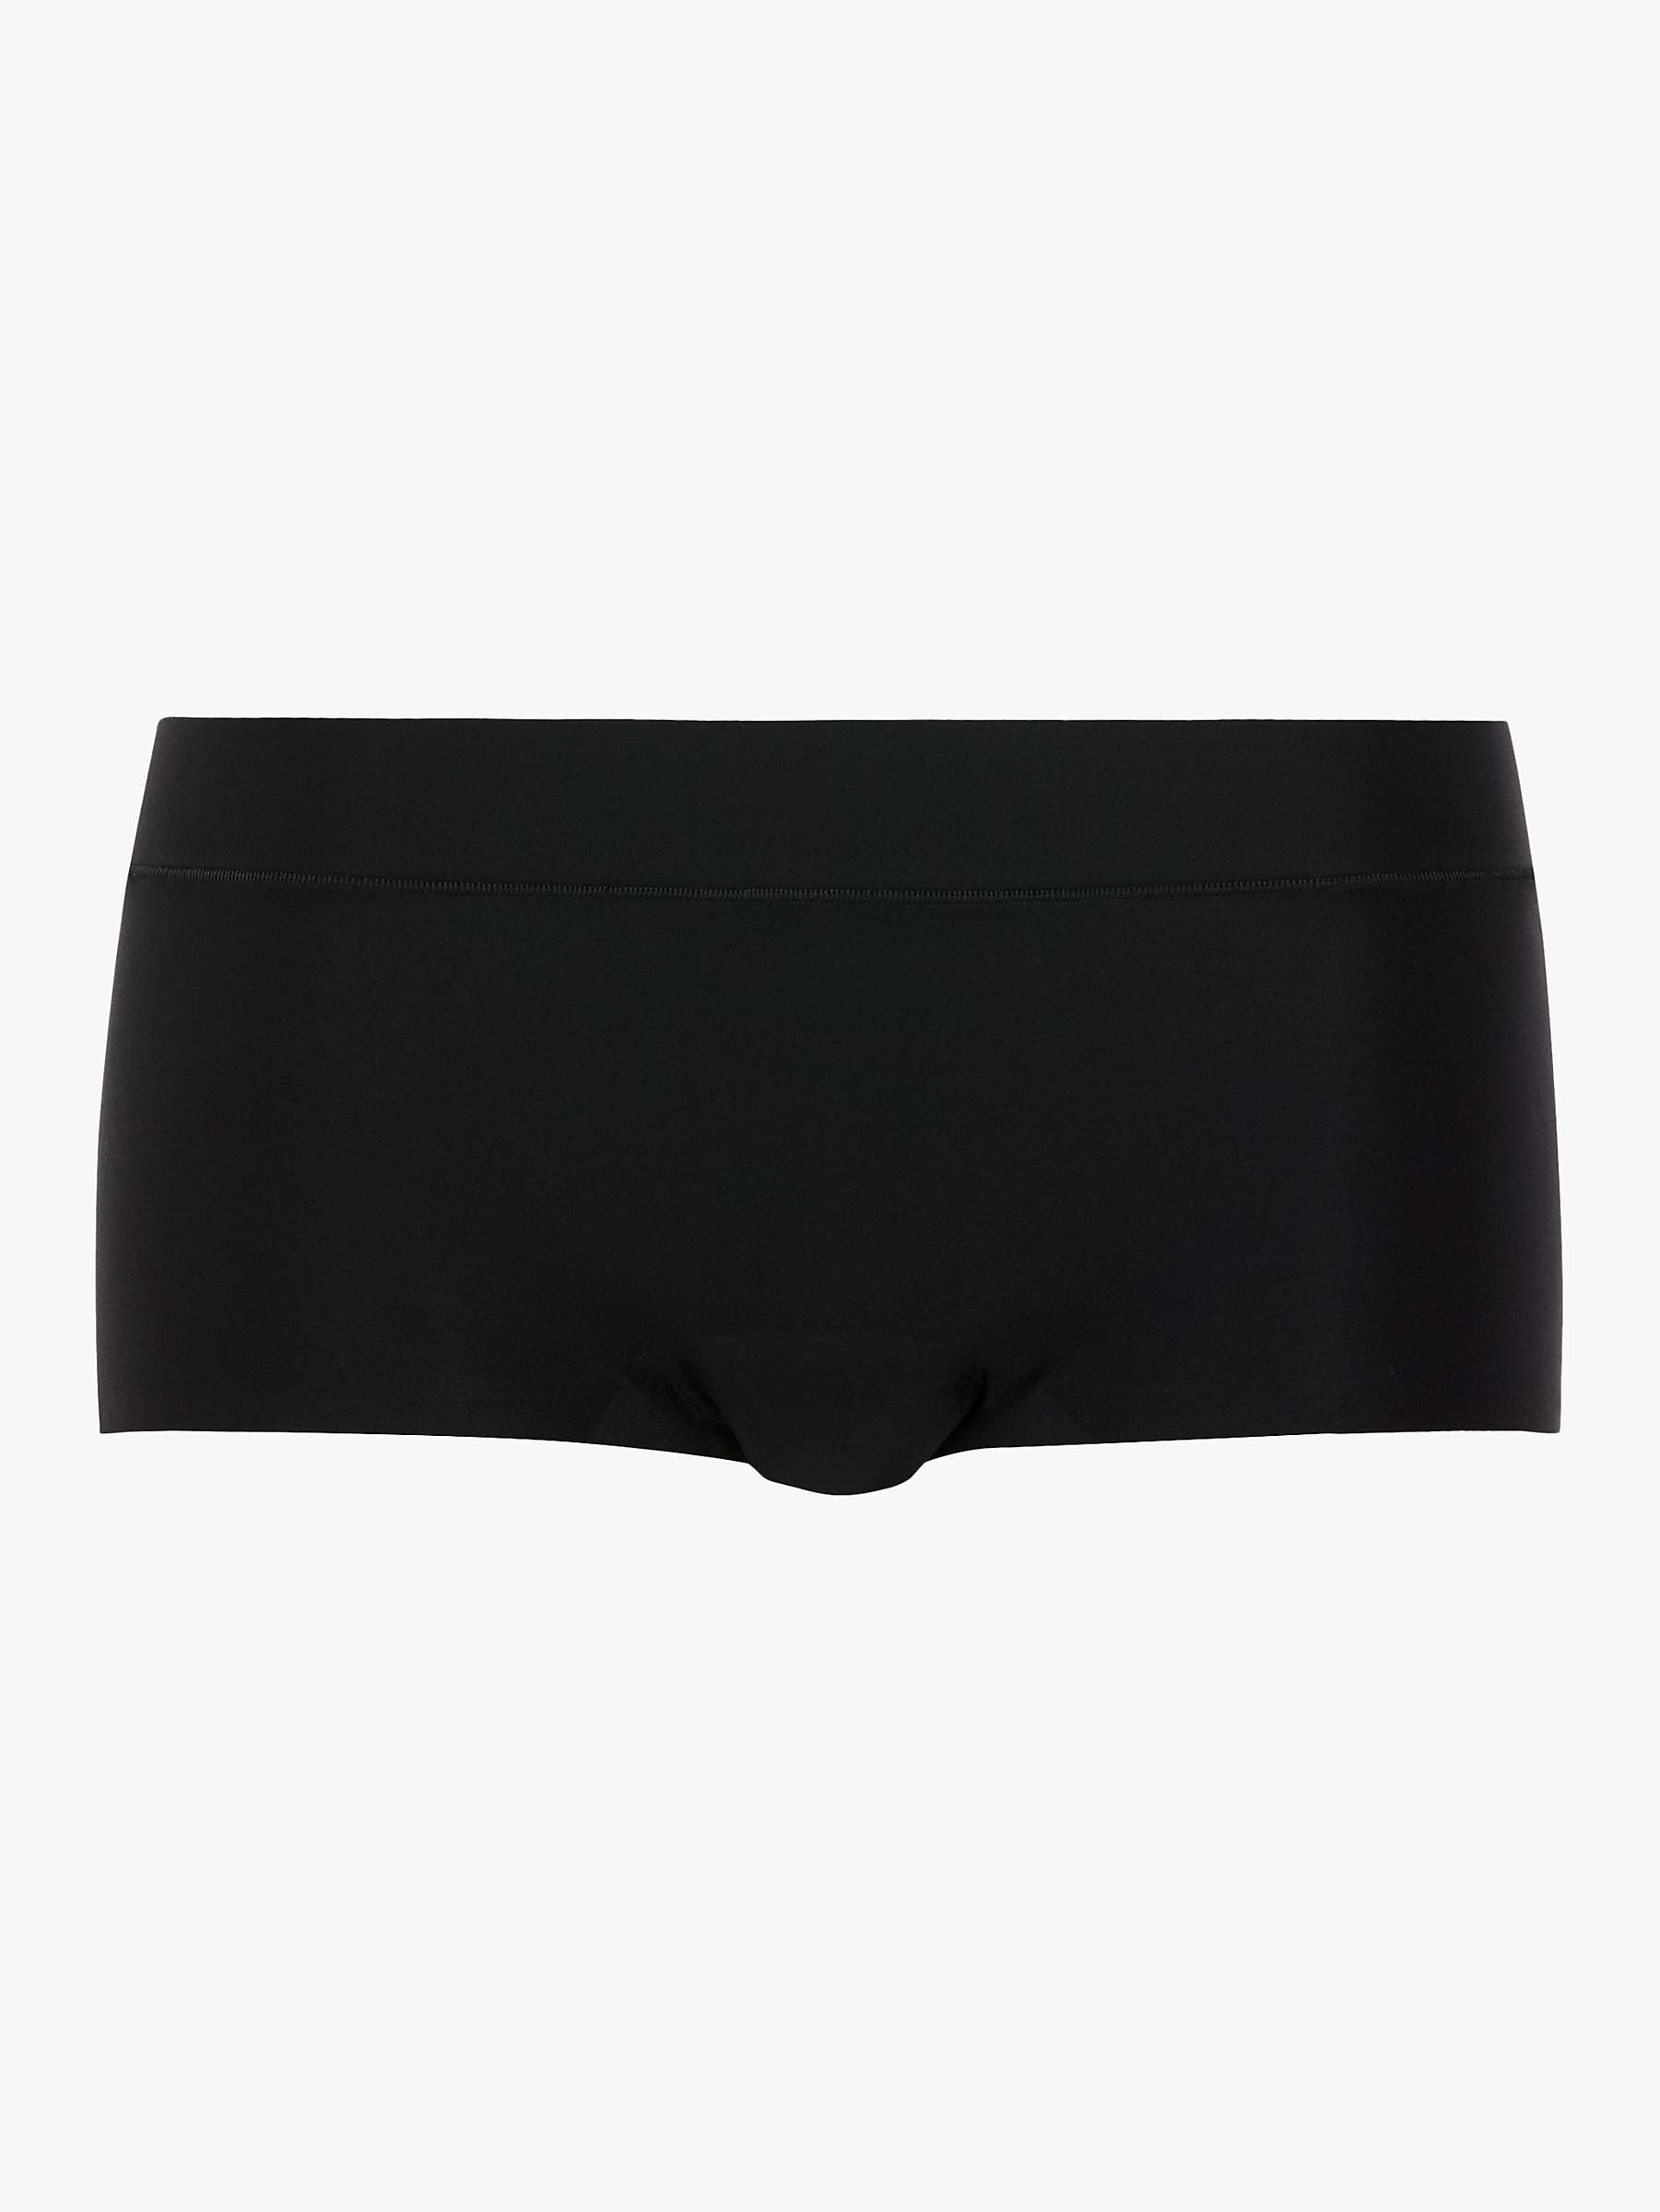 Buy Chantelle Soft Stretch Boy Short Knickers Online at johnlewis.com